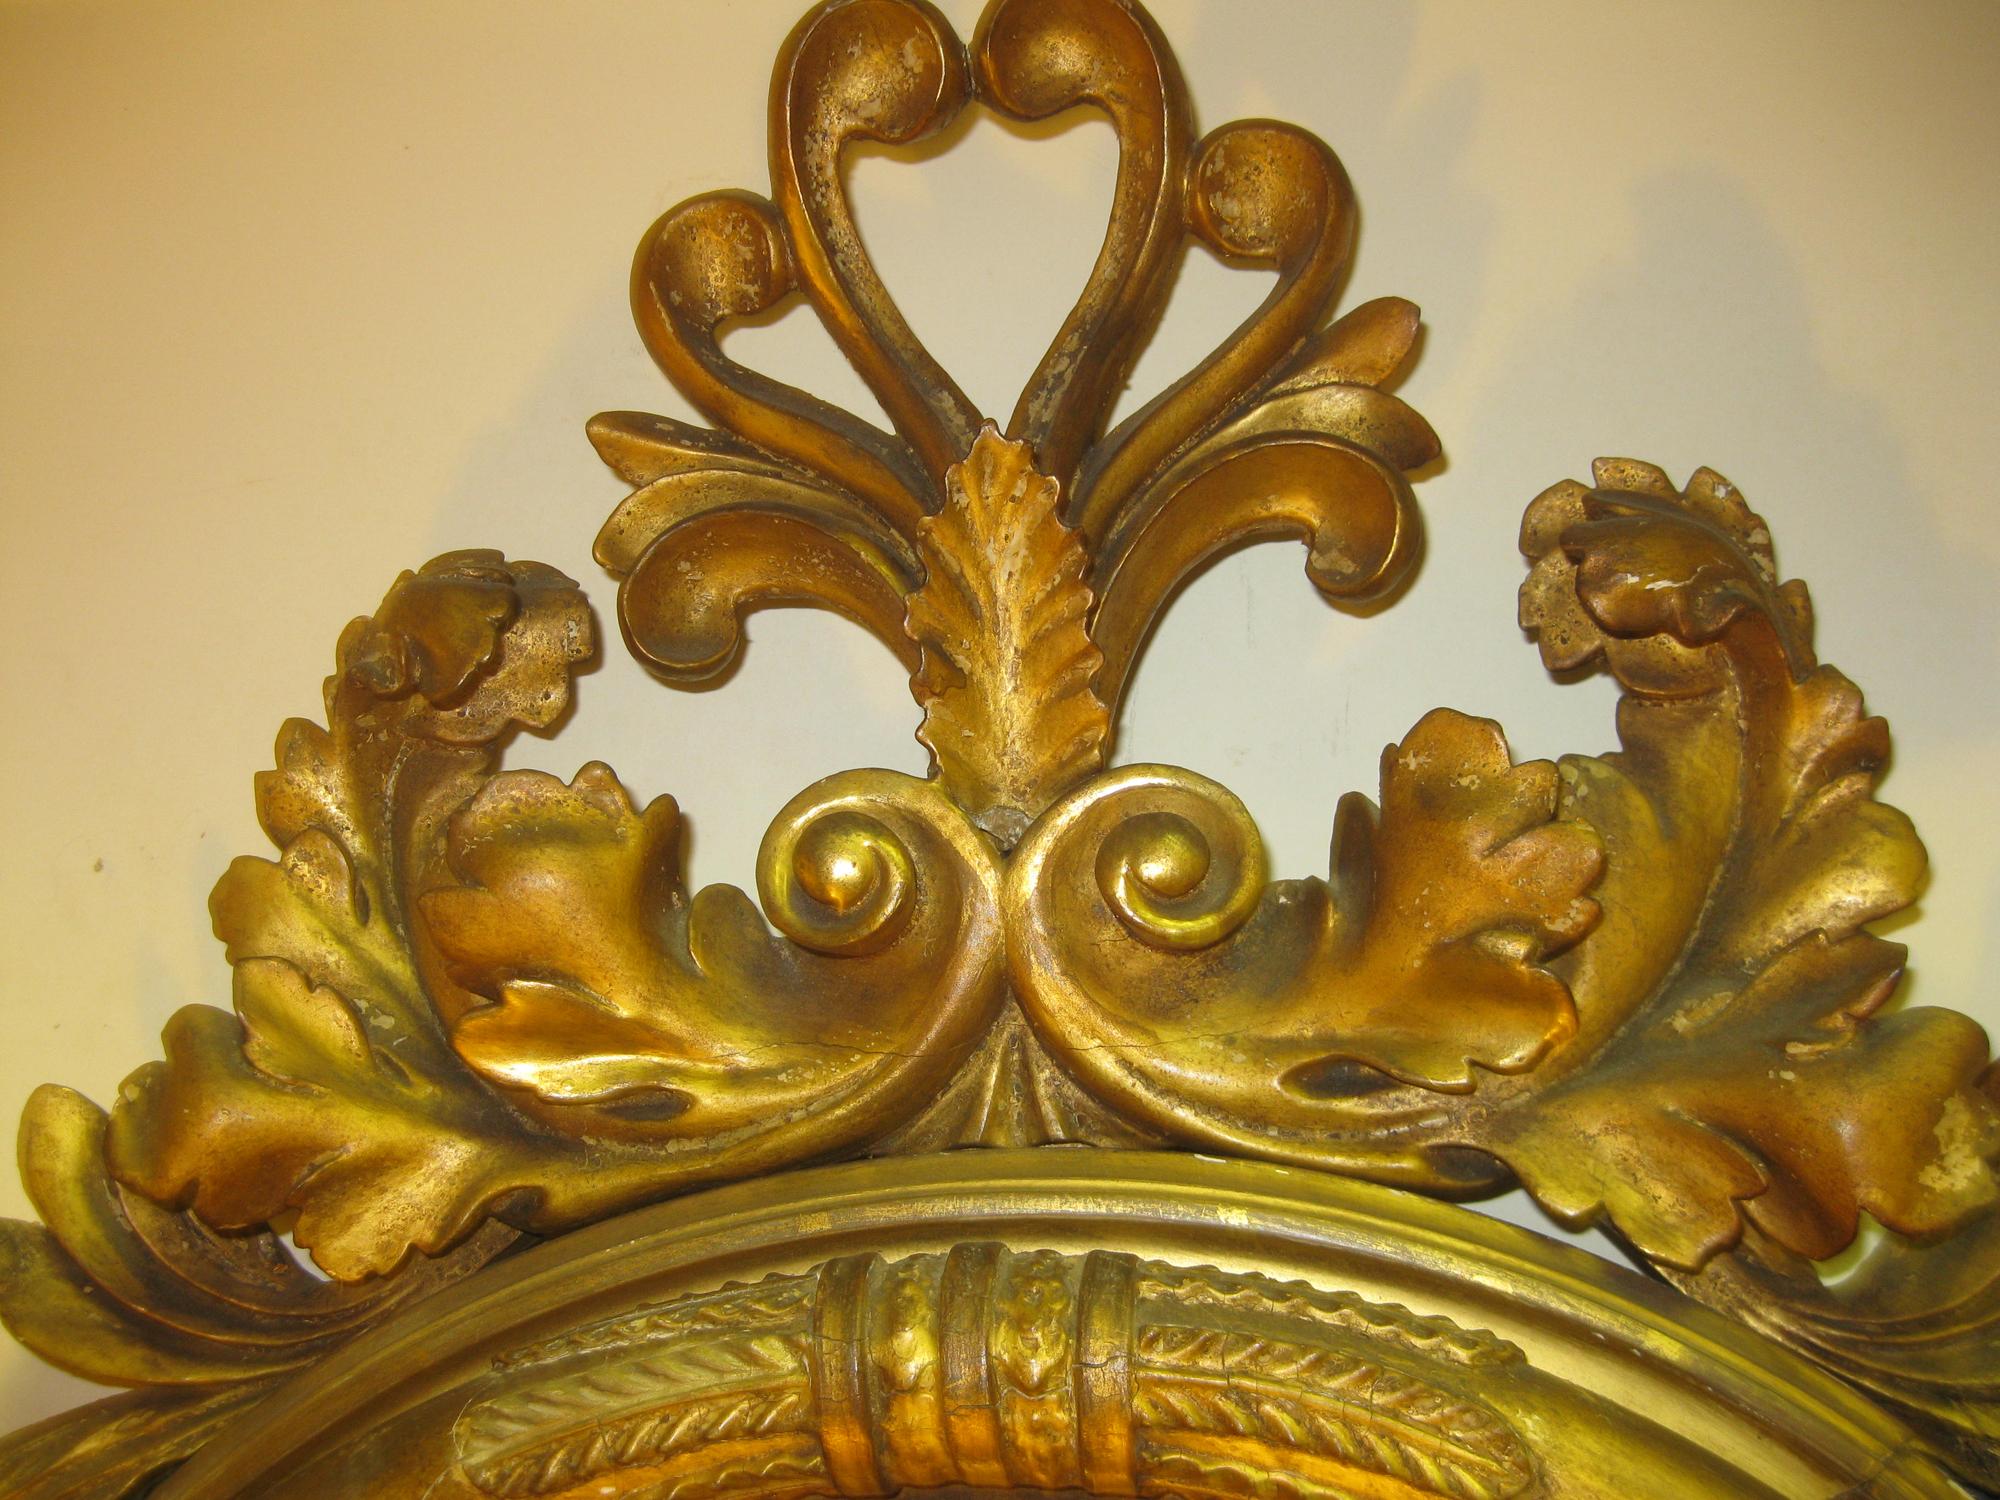 English Regency giltwood convex mirror, circa 1810. Featuring elaborate carving at top and bottom of acanthus leaves and scrolls, with two single graceful girandole. Bull's-eye mirrors first became popular in Europe during the 17th and 18th